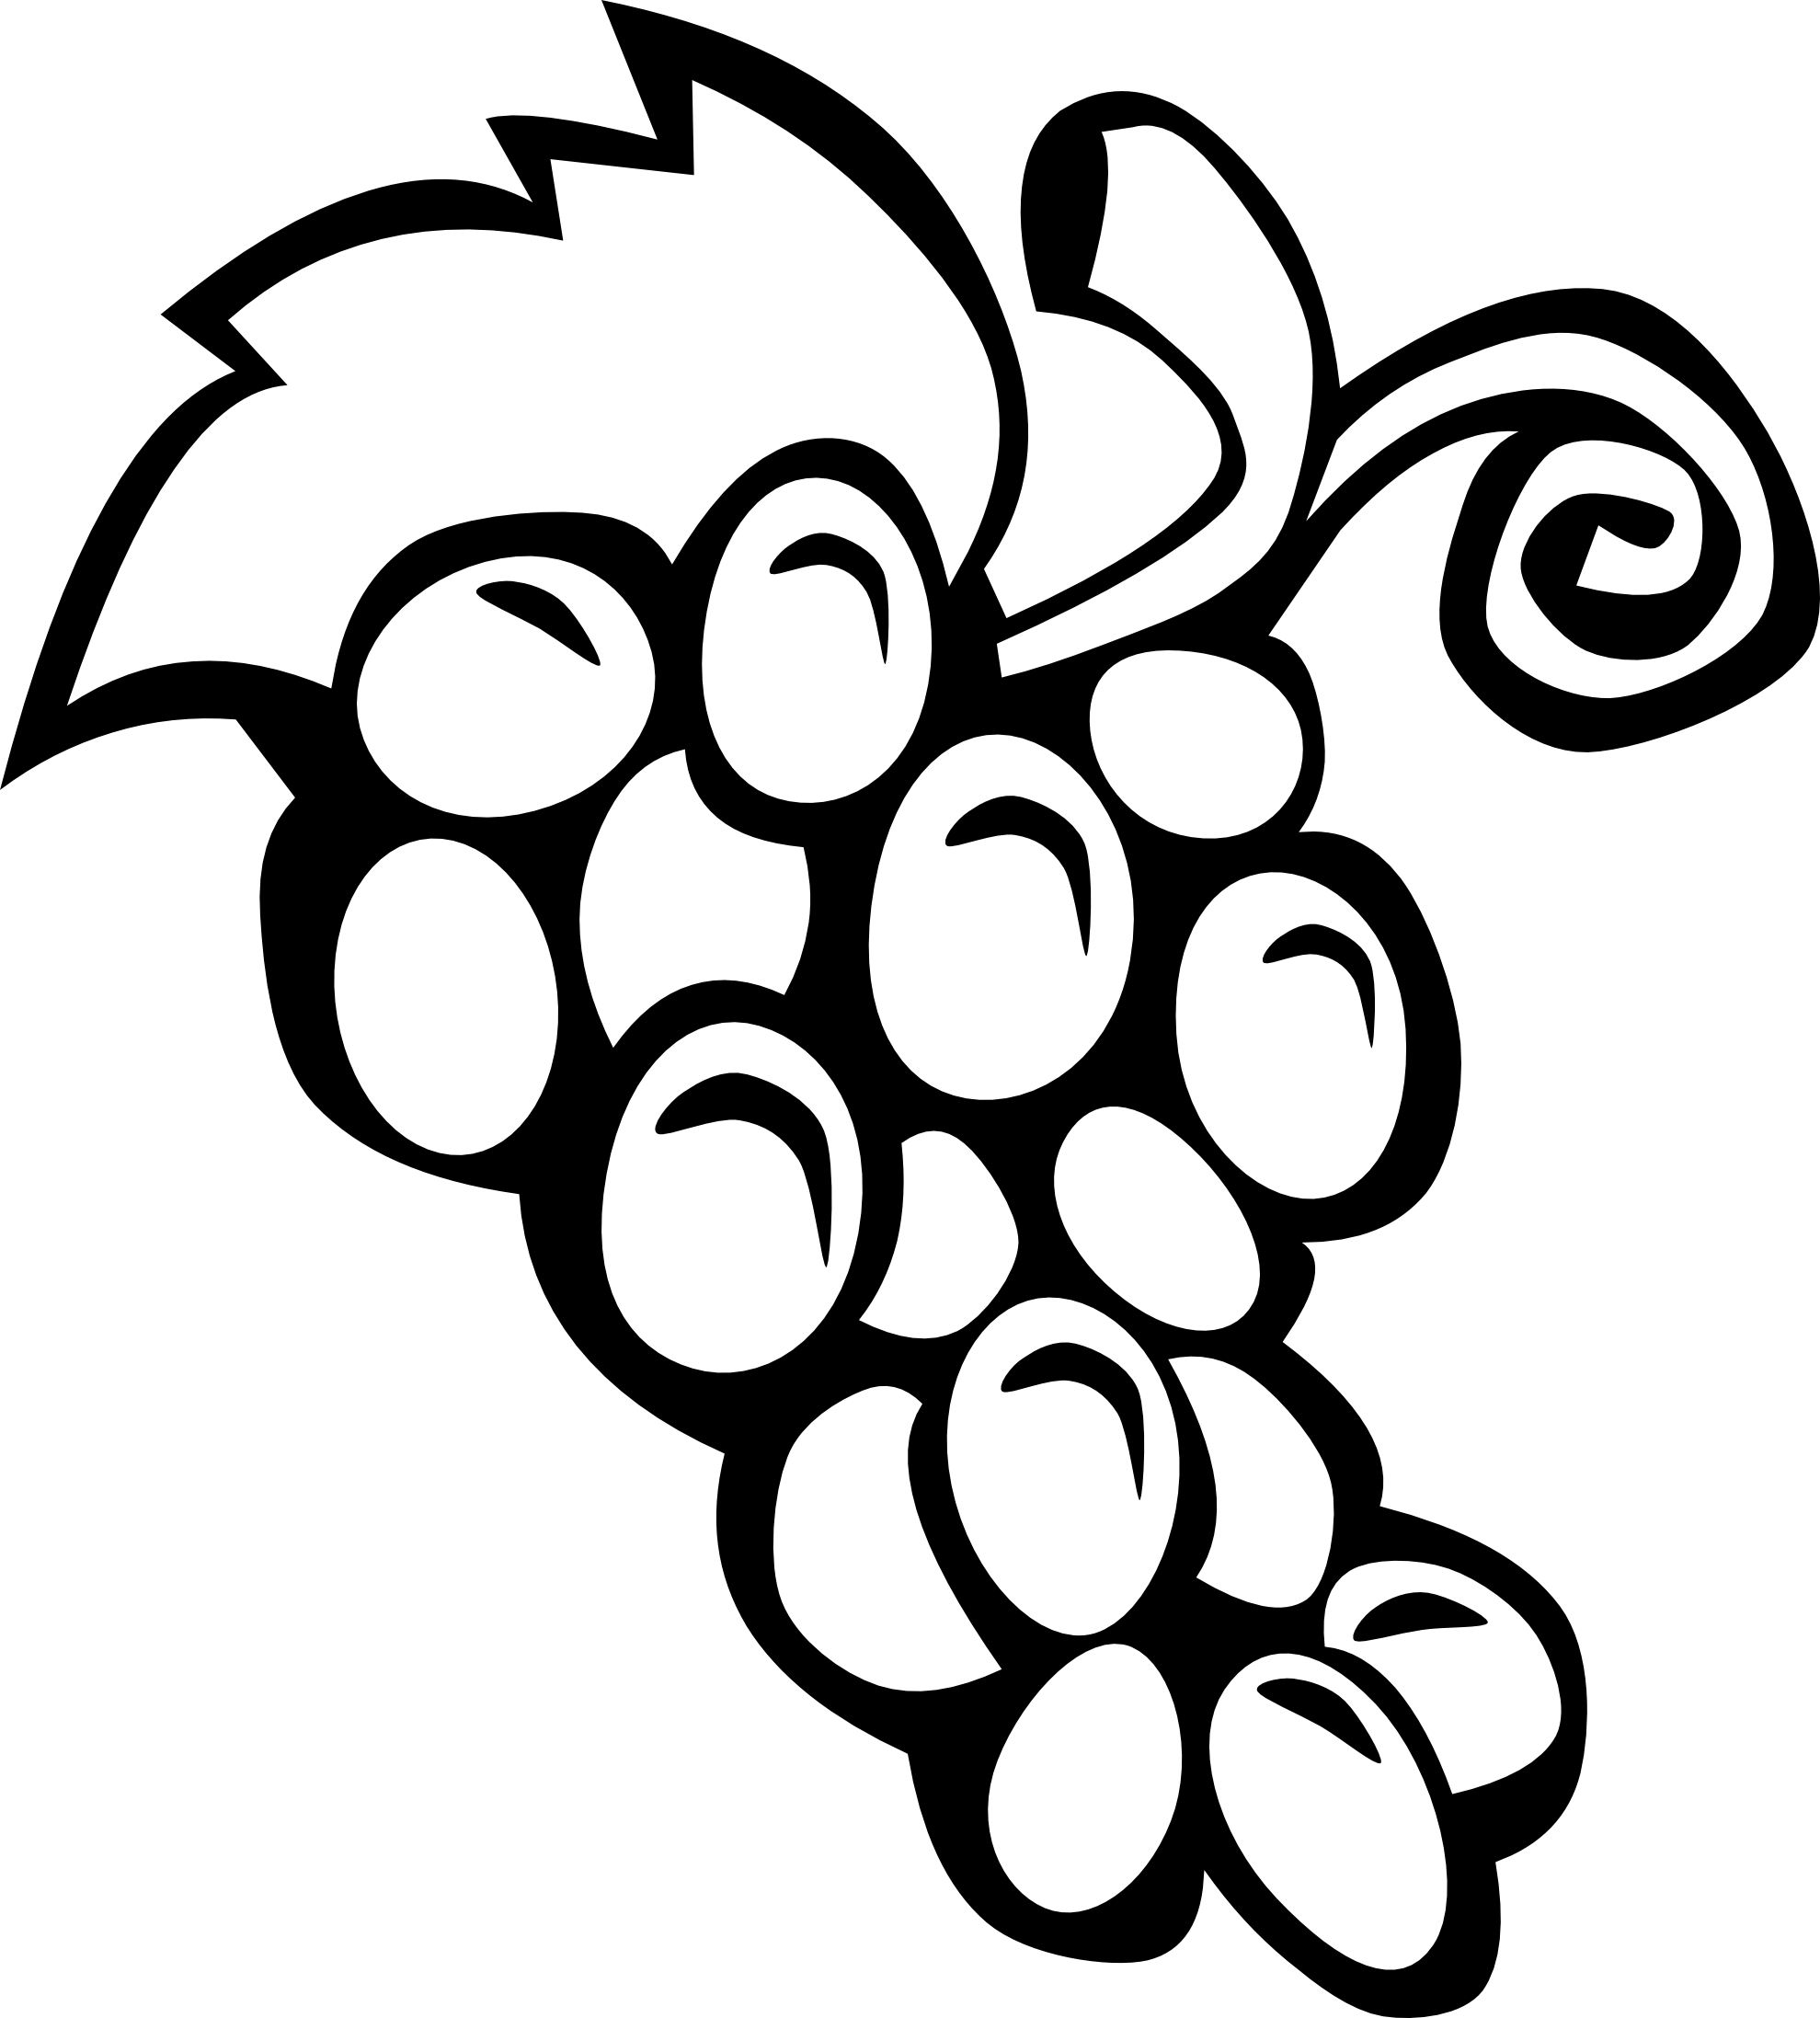 Fruit And Veg Png Black And White - Vegetable Black And White Clipart, Transparent background PNG HD thumbnail